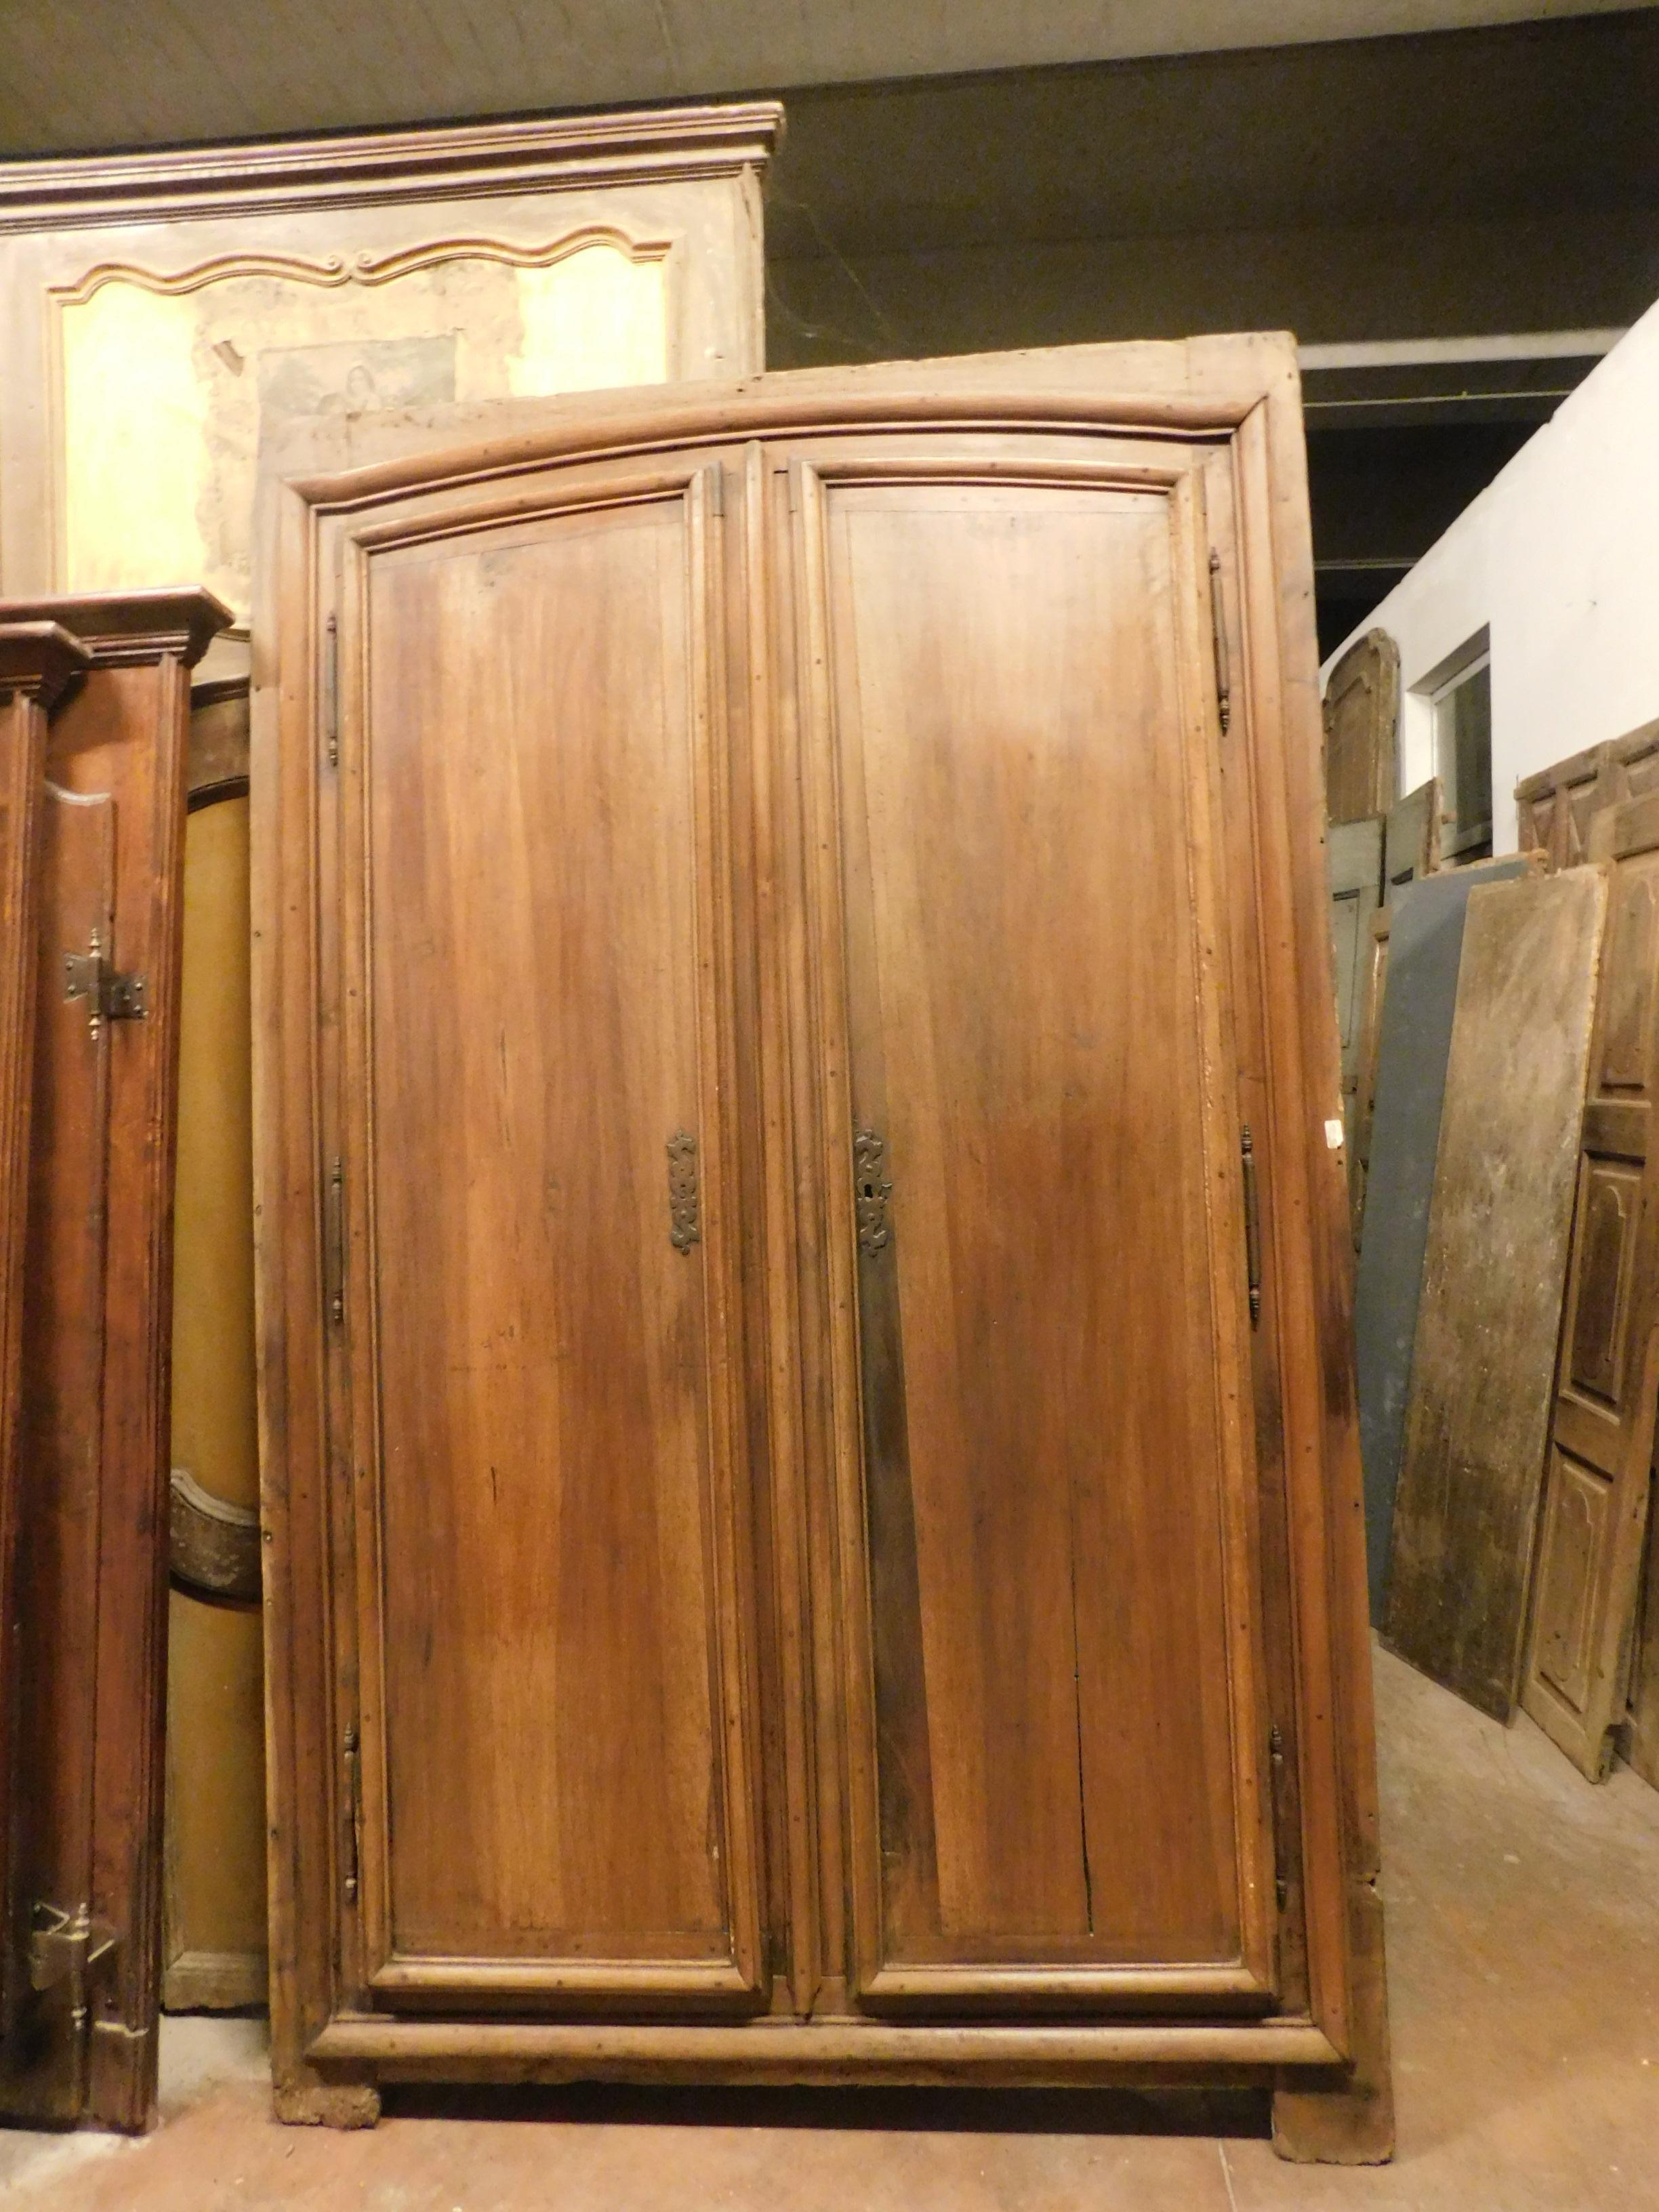 Ancient placard door or built-in wardrobe, hand carved in fine brown walnut wood, beautiful patina due to time, article of the 18th century handmade in Italy.
It is in a beautiful piece, double door used once as a built-in wardrobe, it can also be